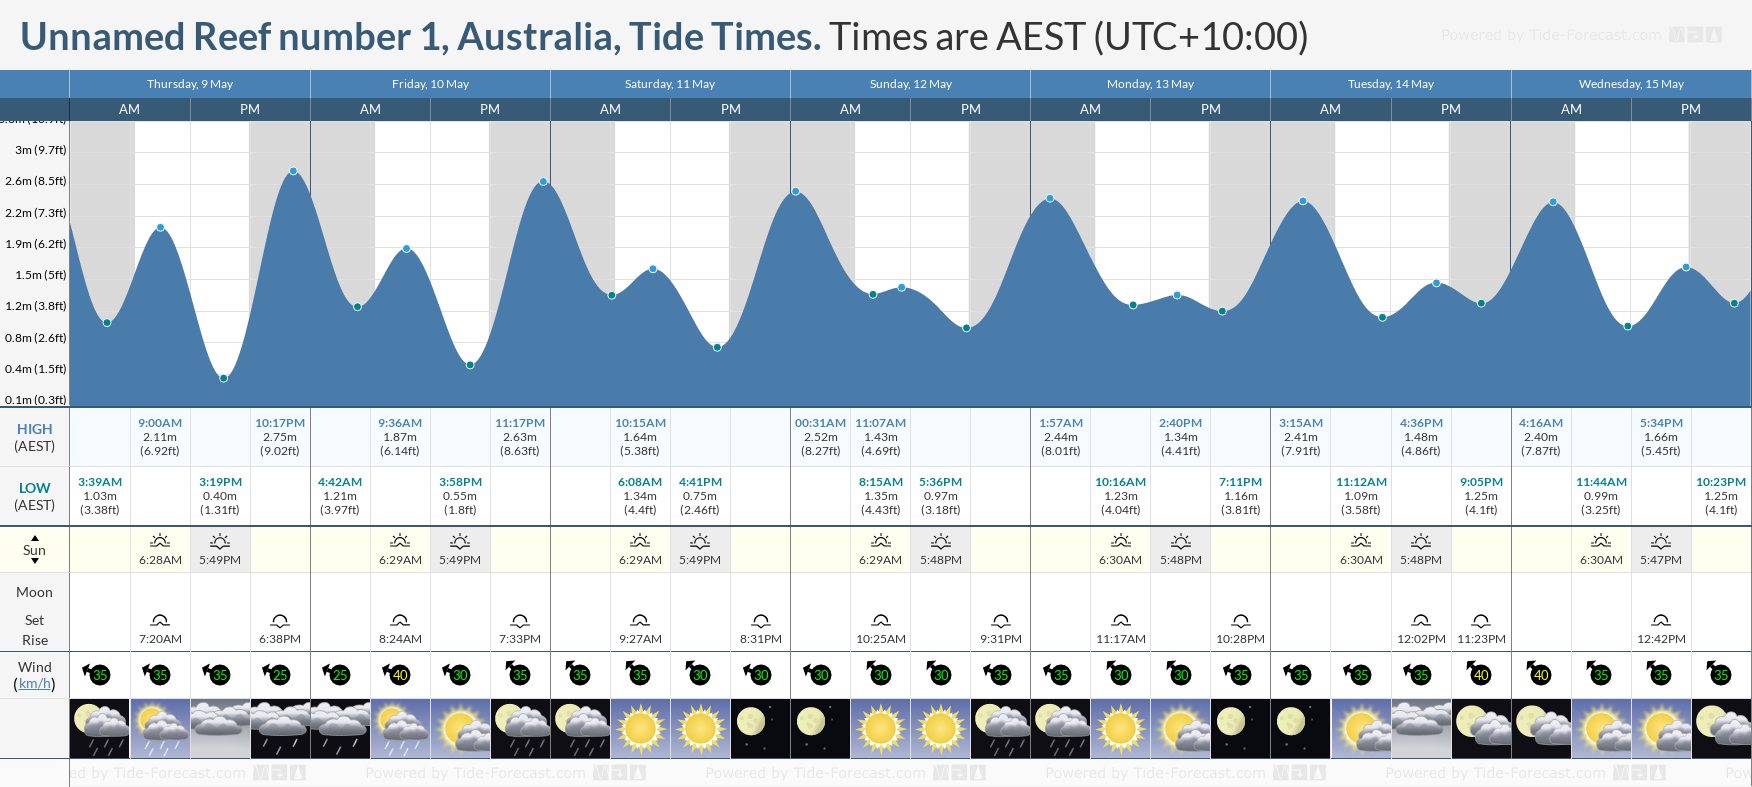 Unnamed Reef number 1, Australia Tide Chart including high and low tide tide times for the next 7 days